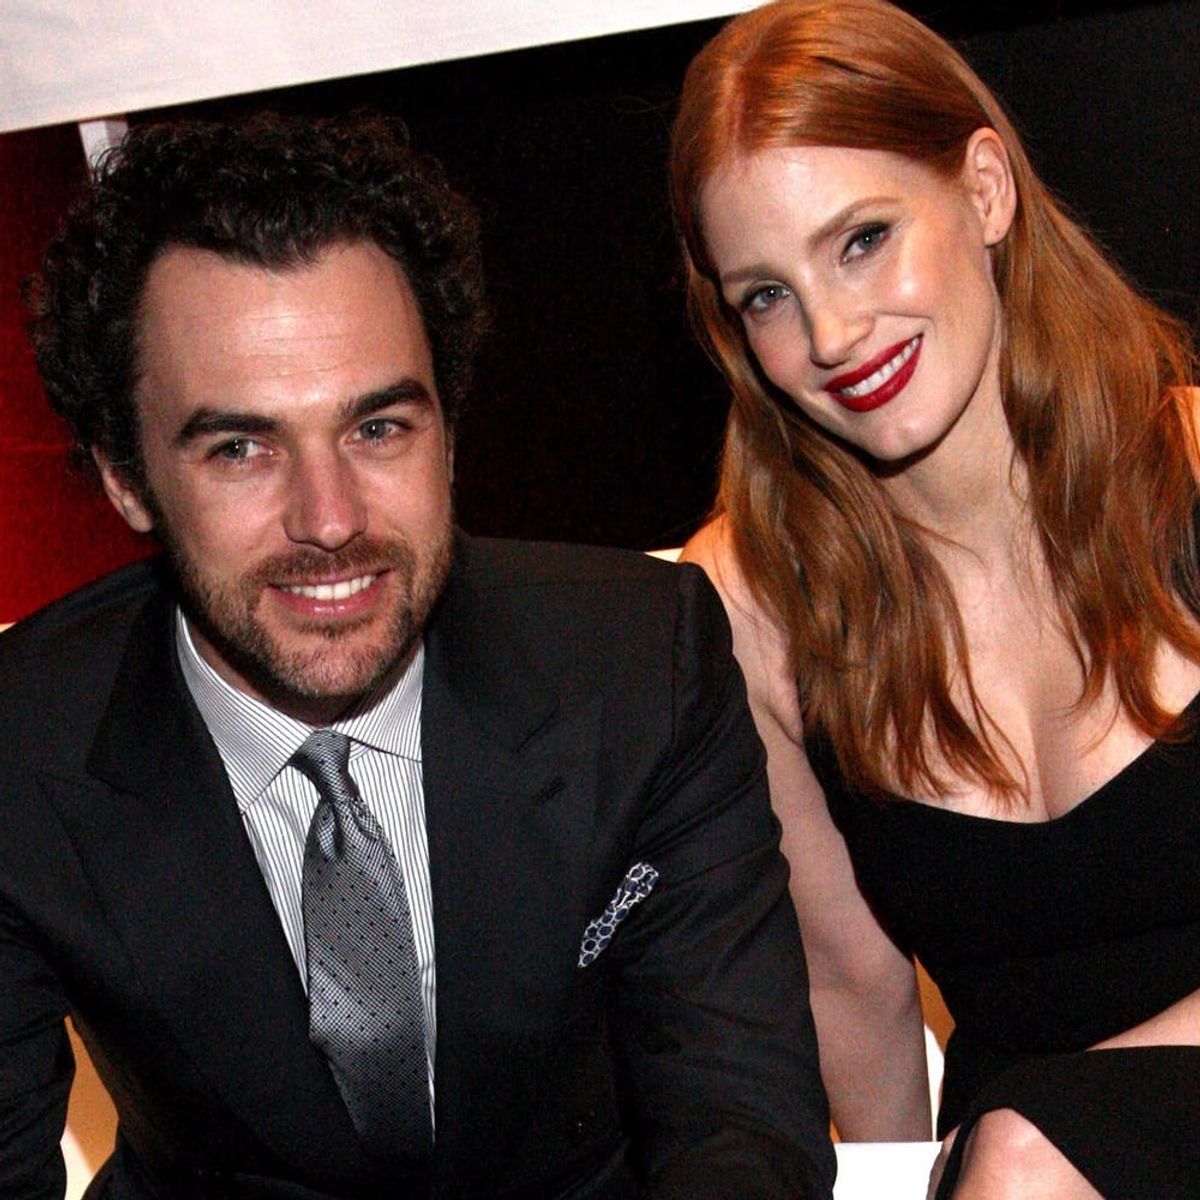 Jessica Chastain Just Got Hitched in an Italian Destination Wedding for the Books